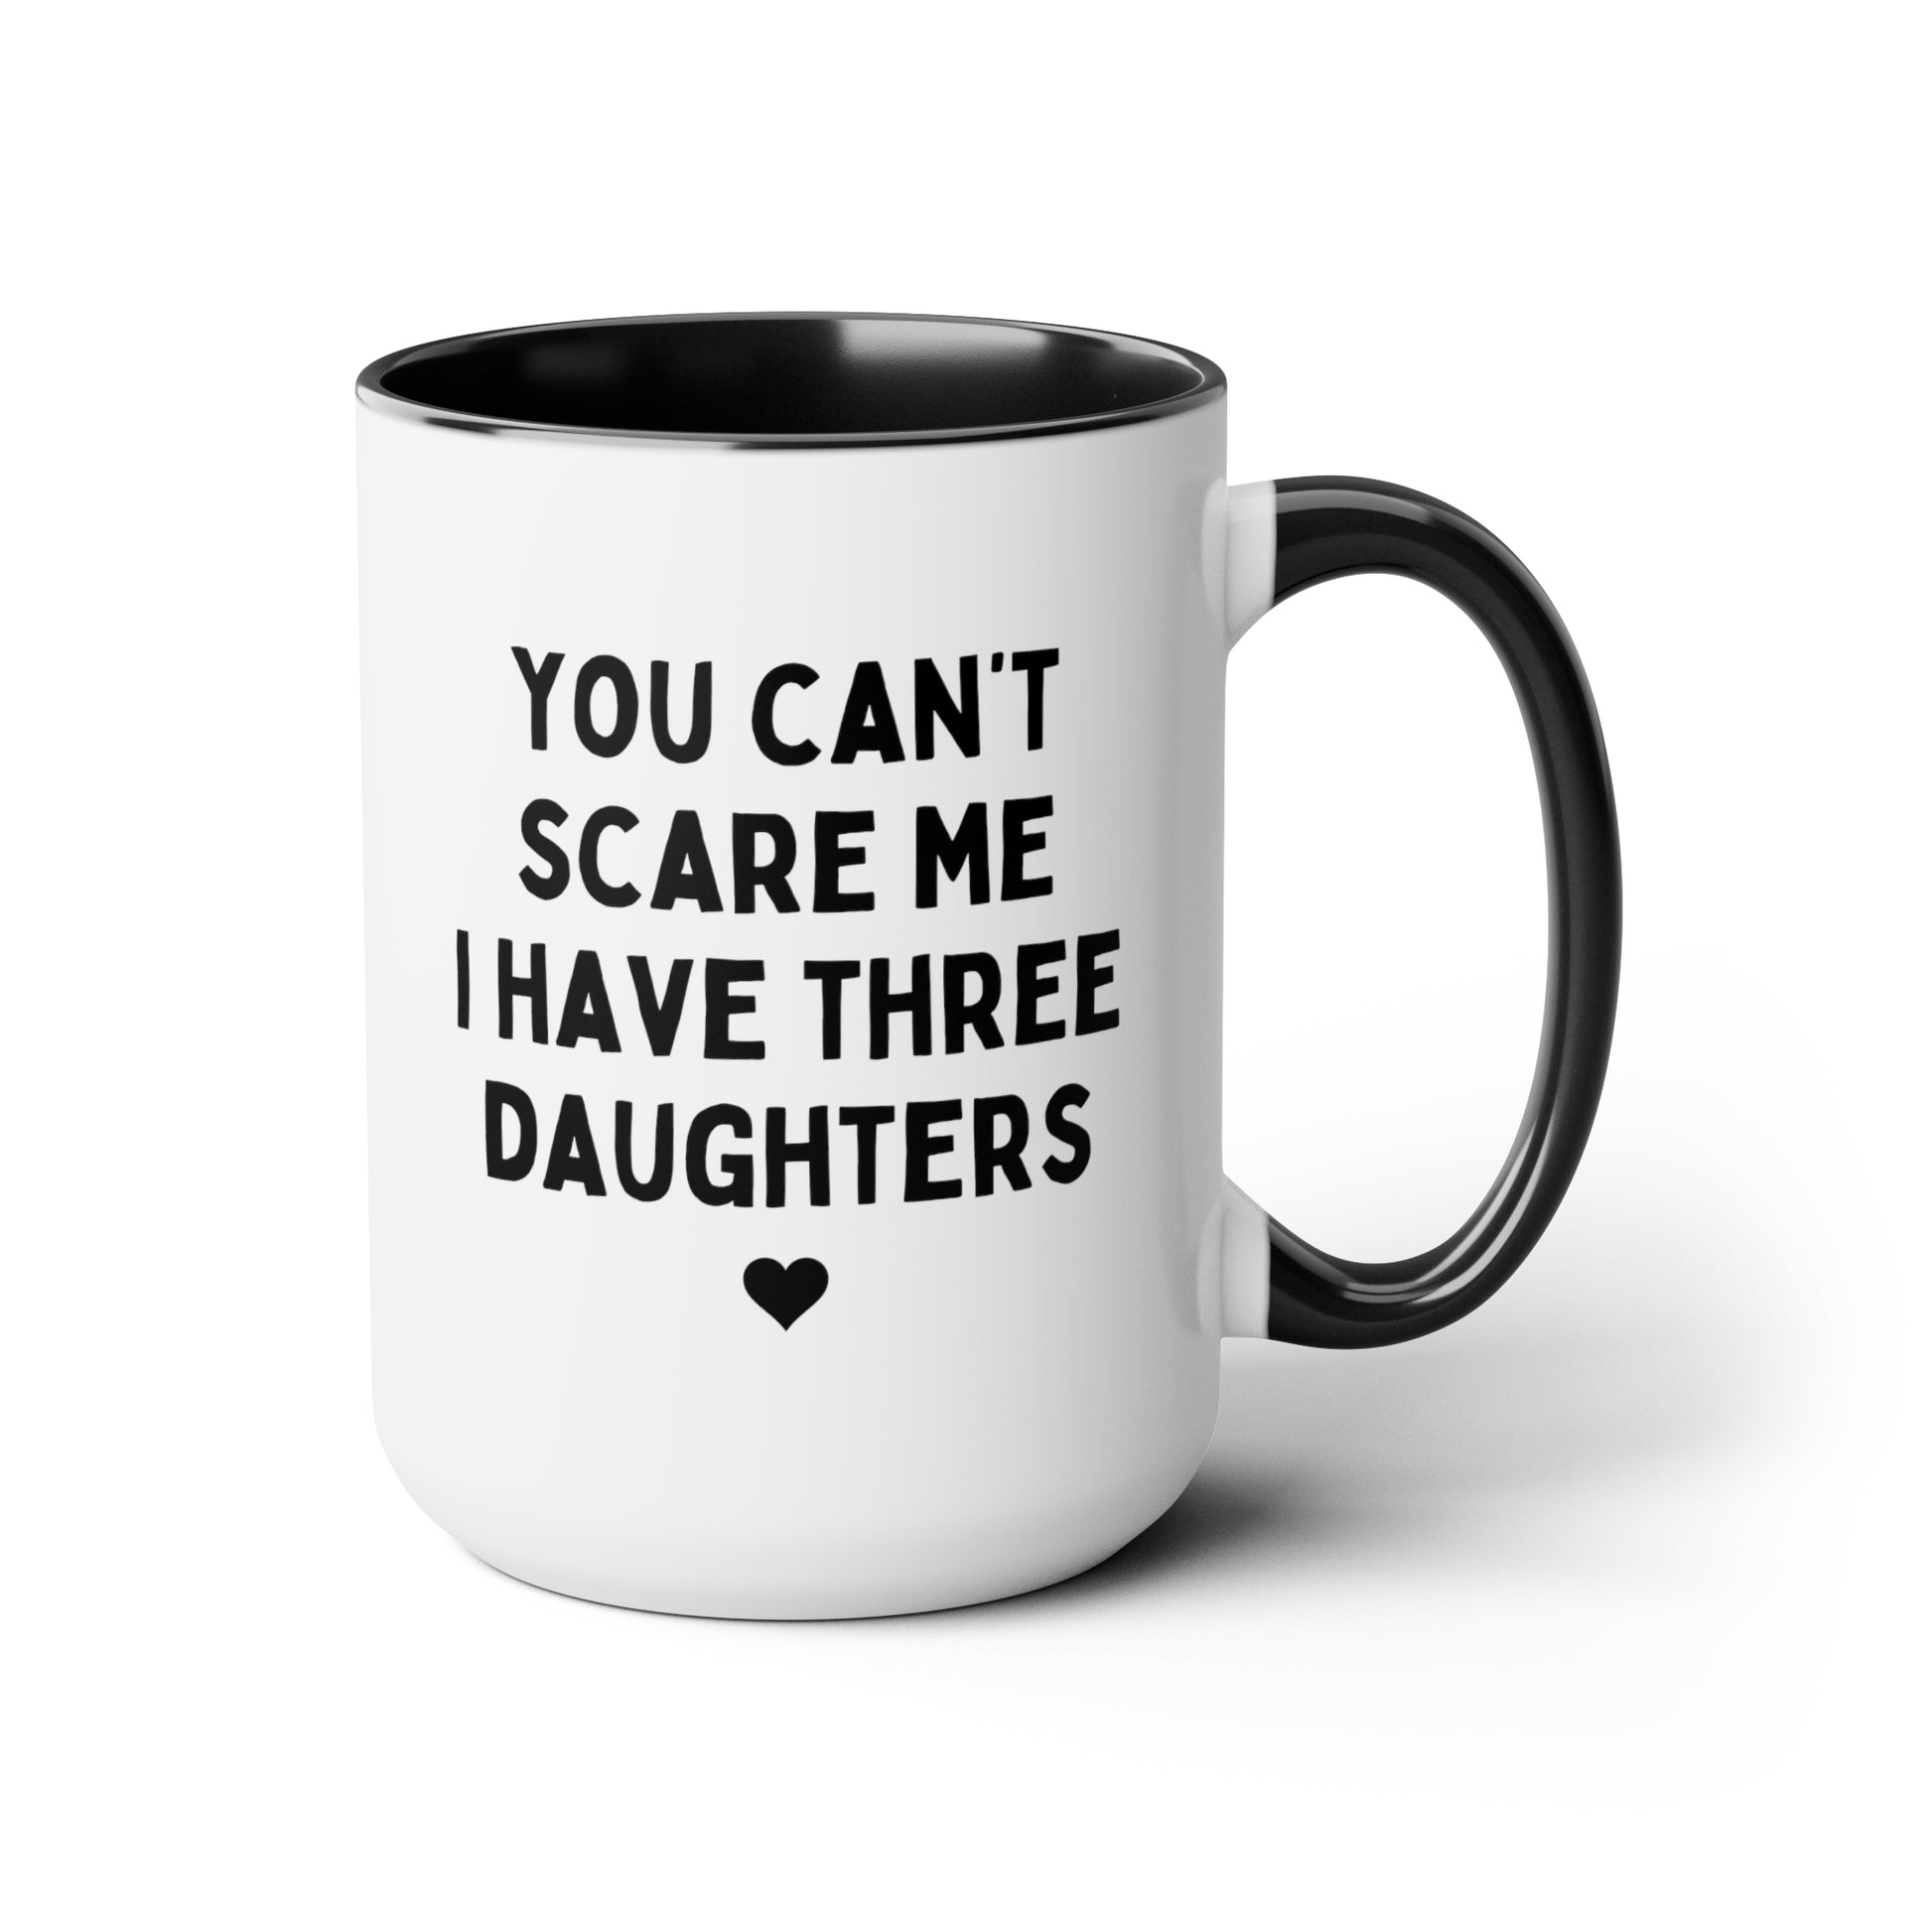 You Can't Scare Me I have Three Daughters 15oz white with black accent funny large coffee mug gift for fathers day dad husband grandpa tea cup waveywares wavey wares wavywares wavy wares